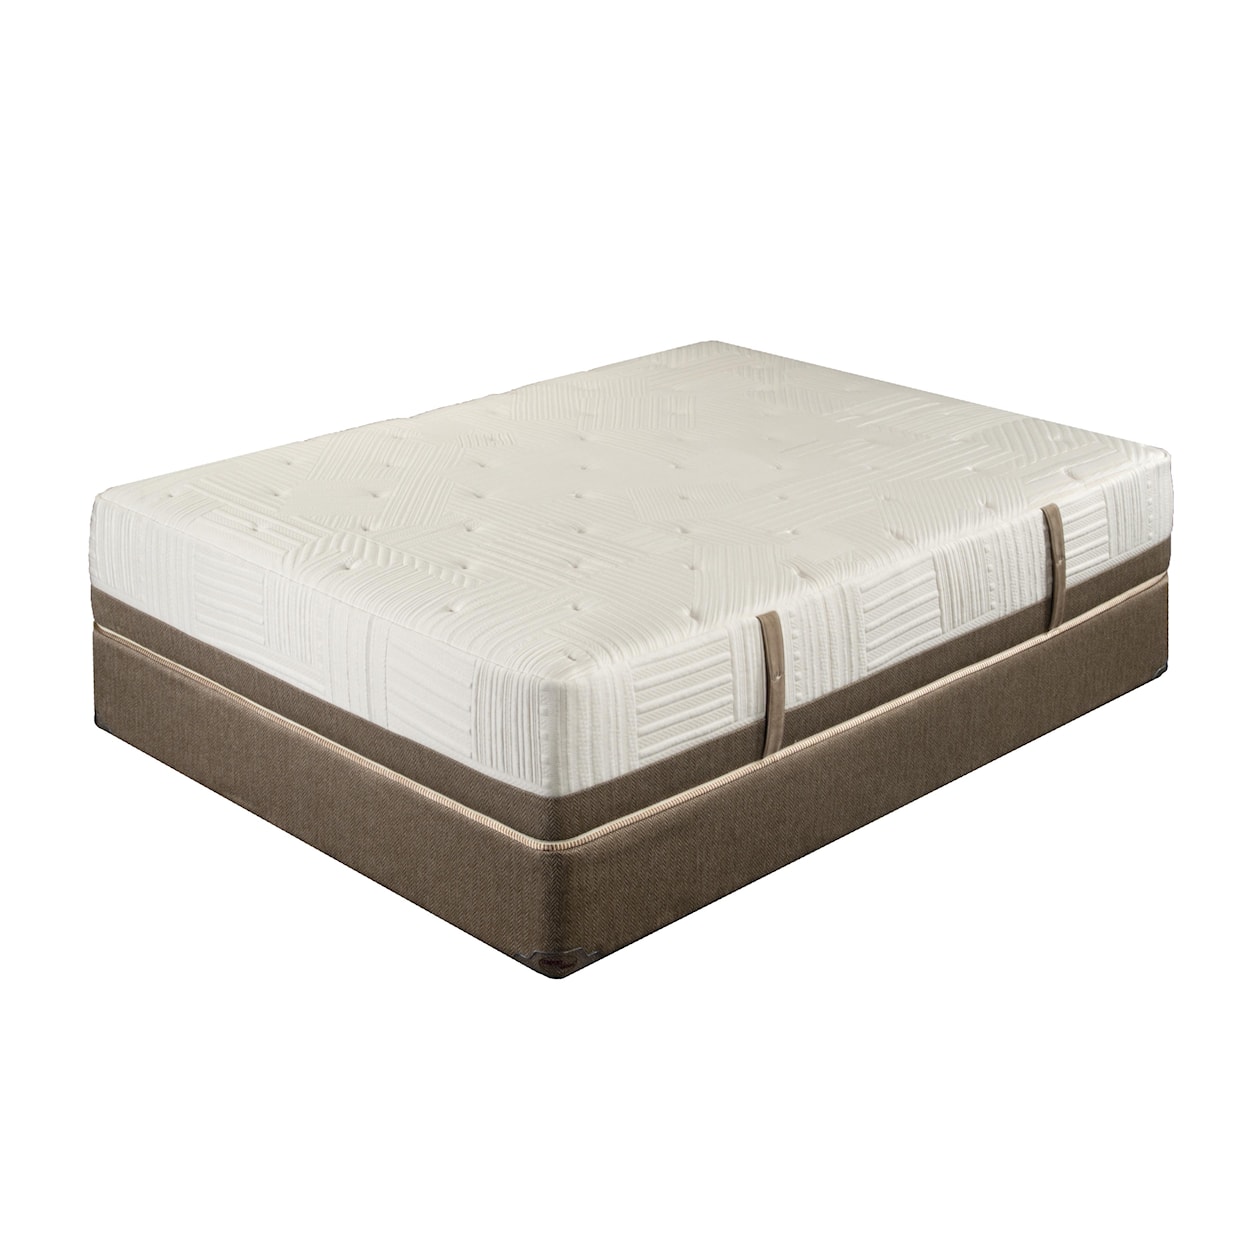 King Koil Extended Life 3100 Twin Luxury Firm Mattress Set